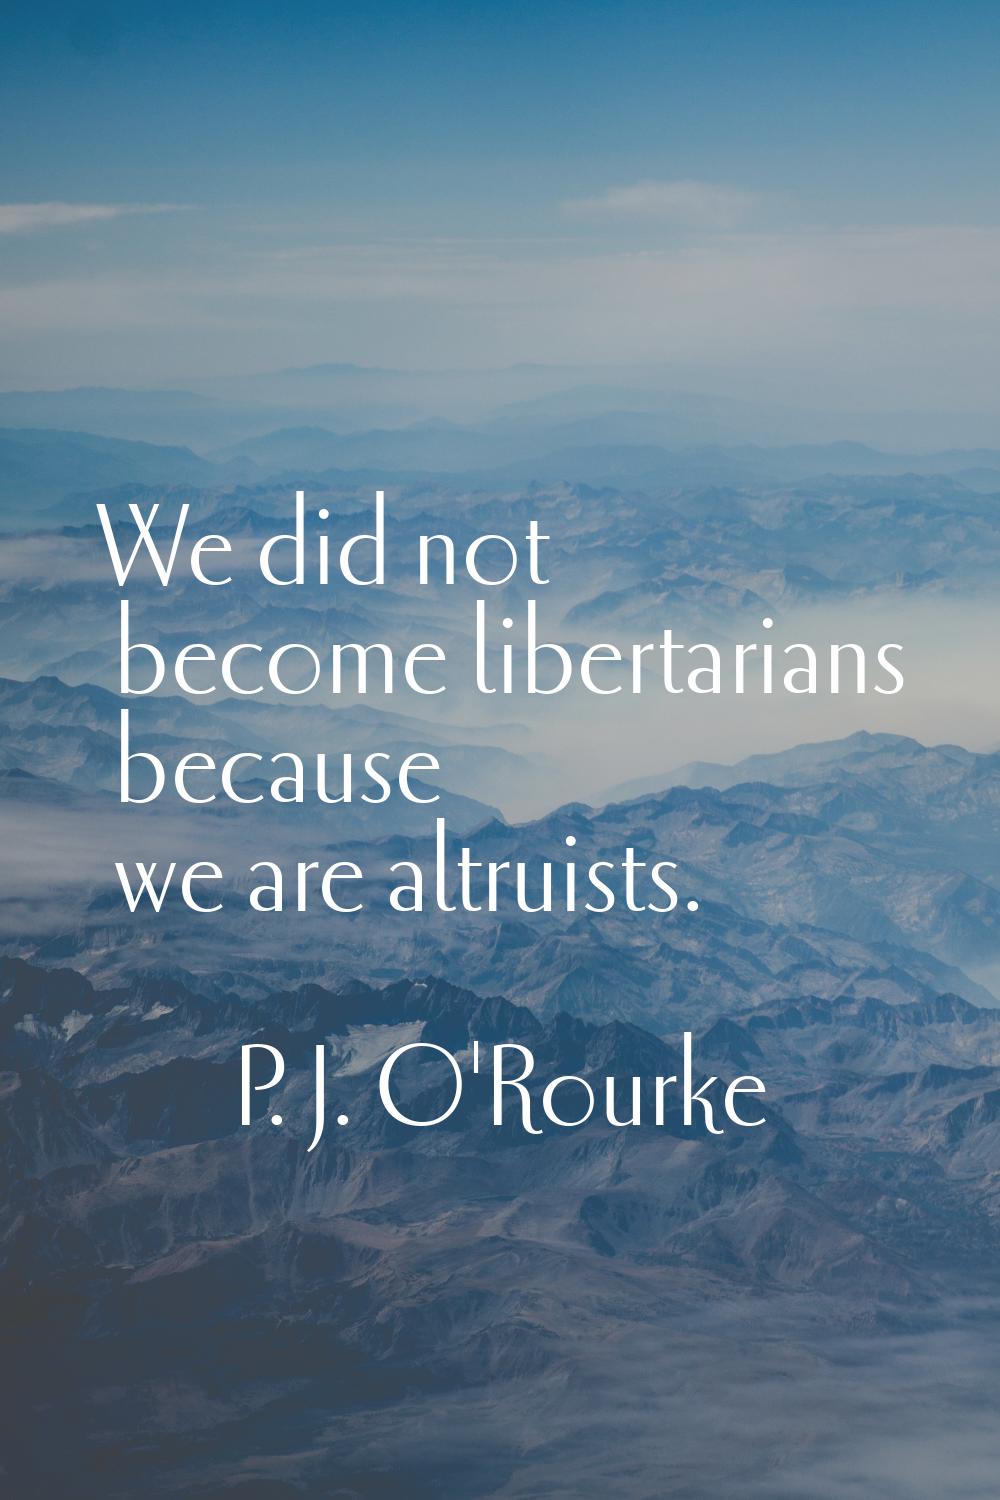 We did not become libertarians because we are altruists.